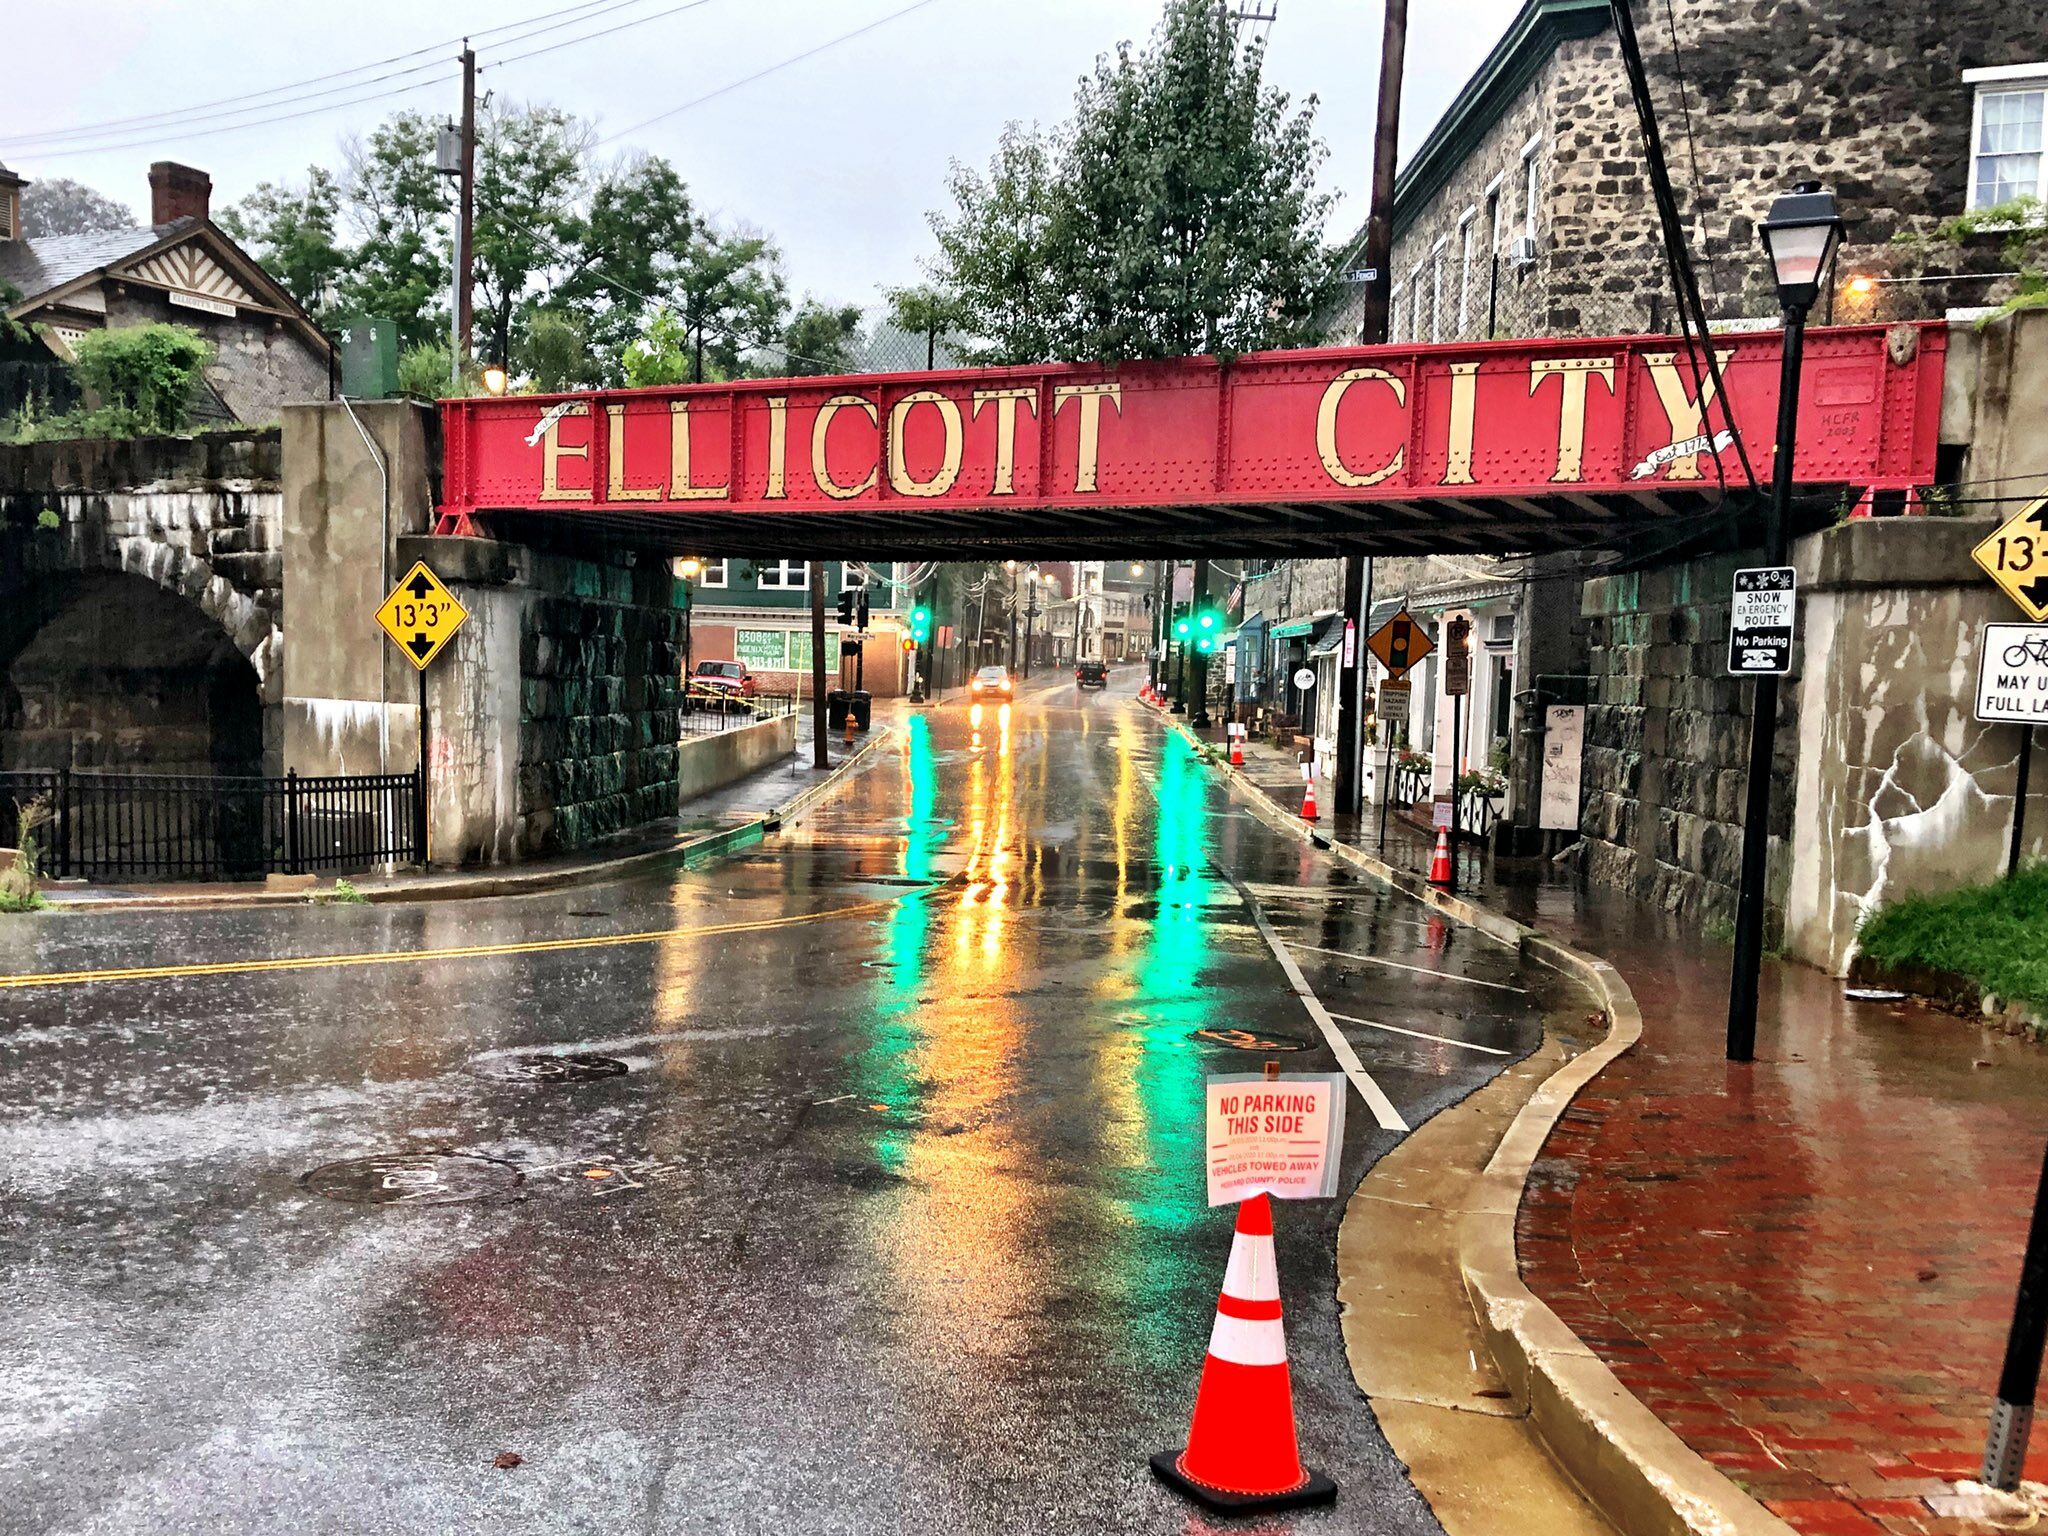 Price of Ellicott City flood prevention project balloons to $130 million